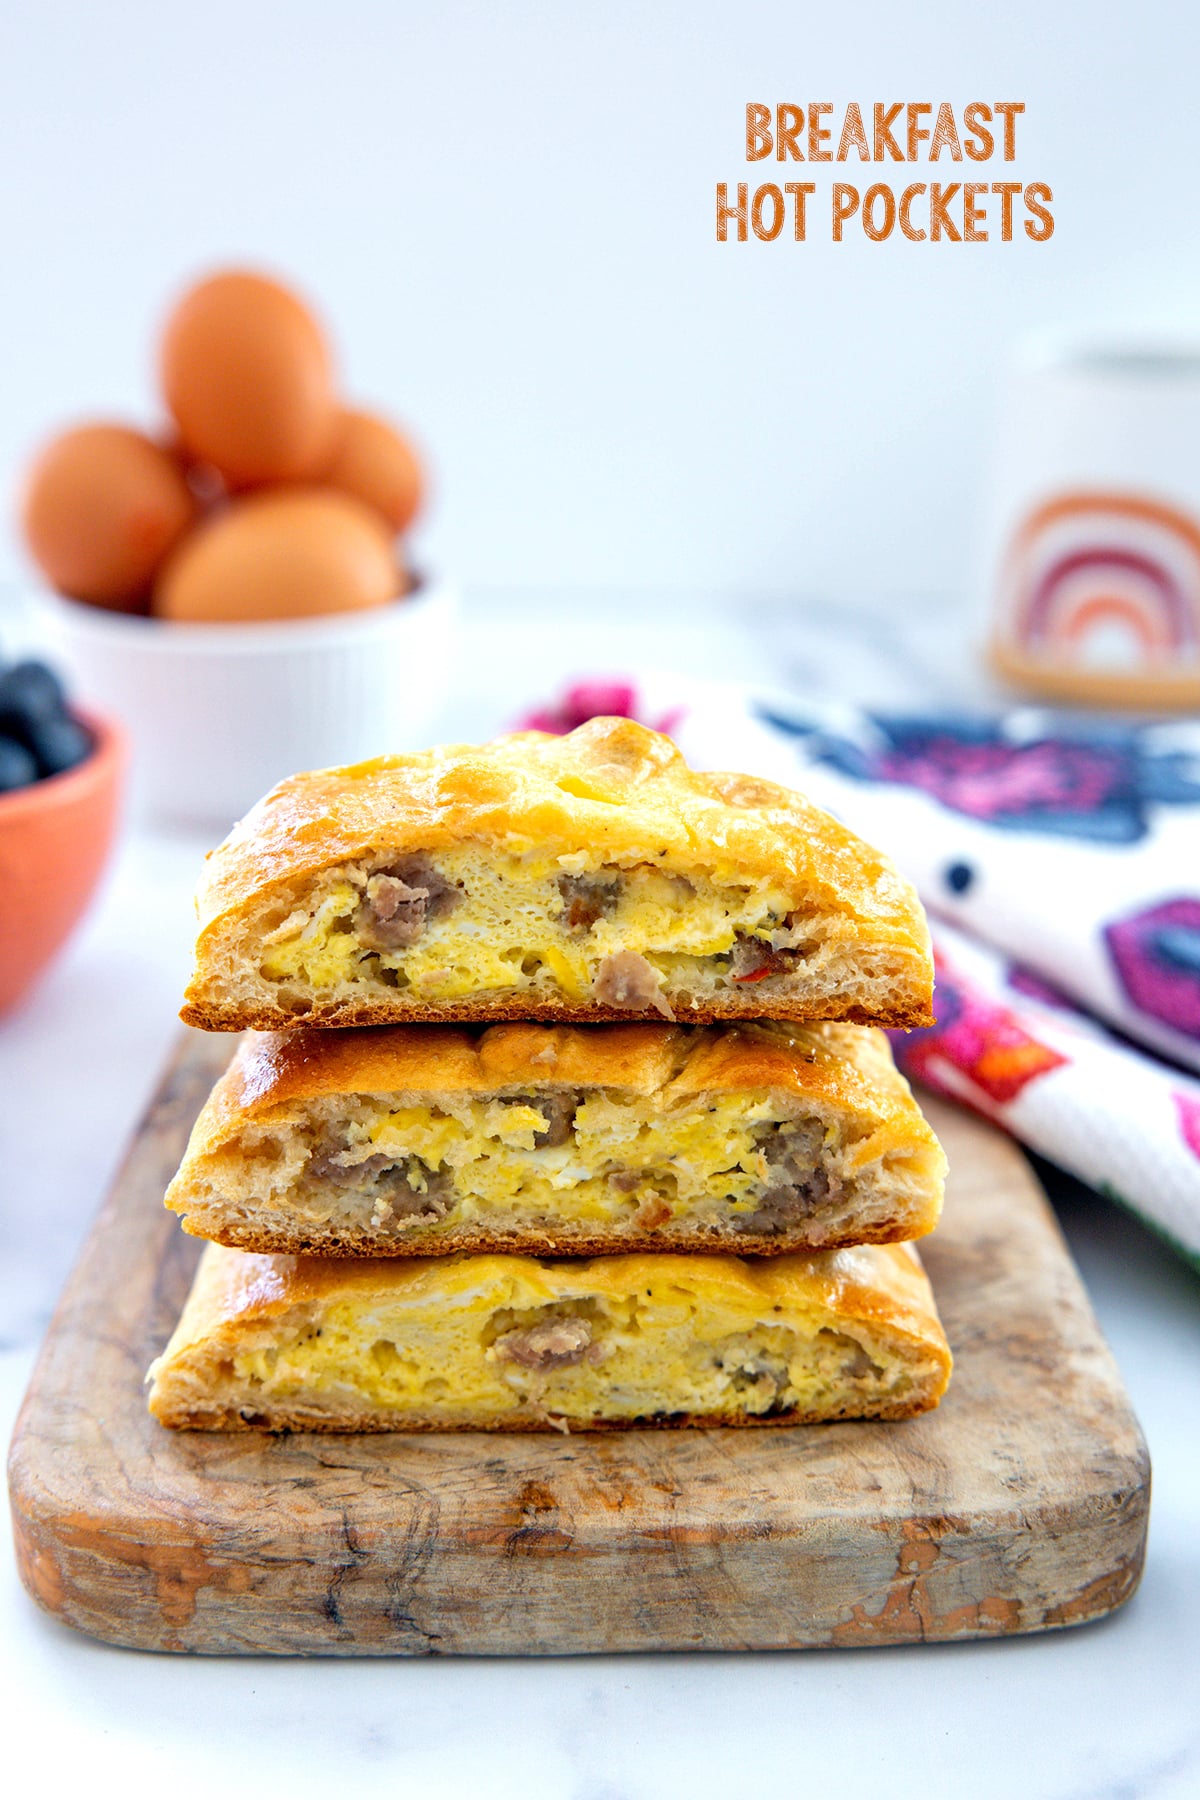 Head-on view of a stack of breakfast Hot Pockets filled with scrambled eggs and sausage with bowl of eggs and coffee cup in background and recipe title at top.